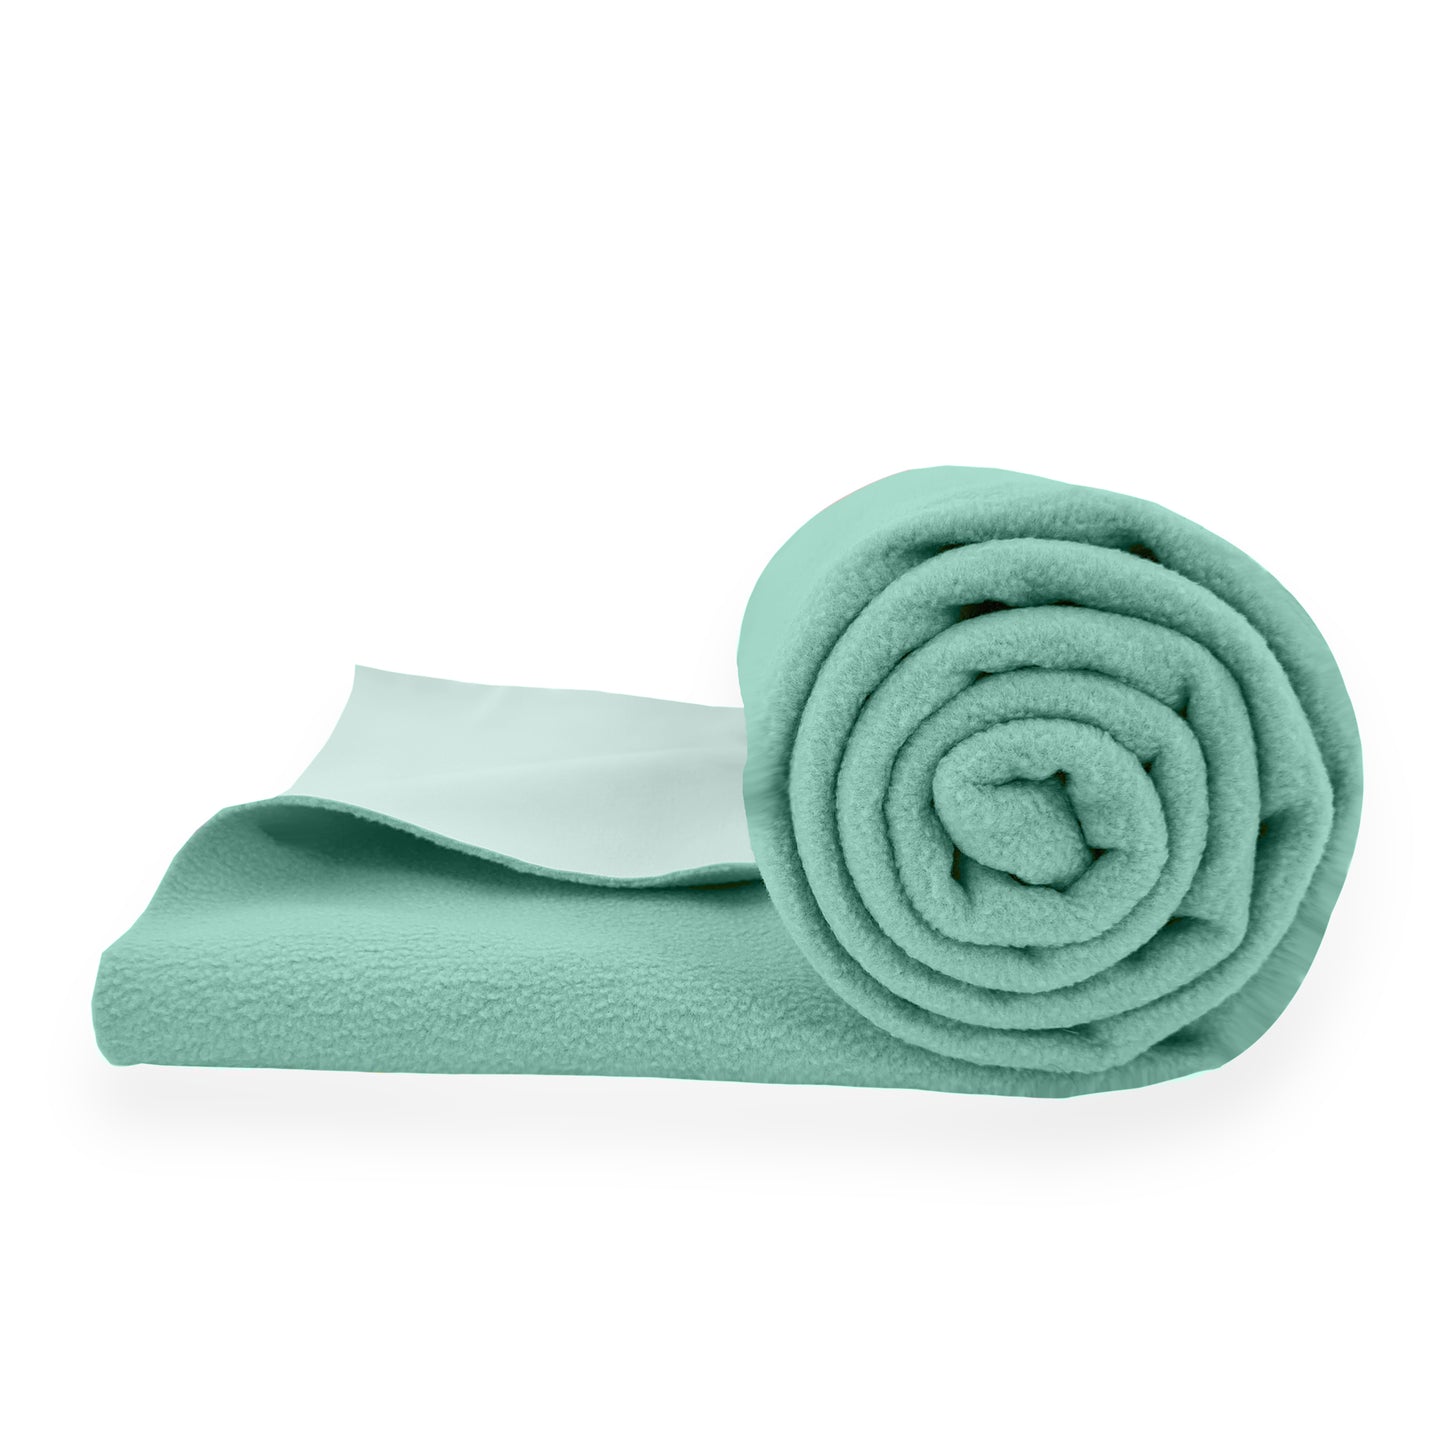 Waterproof Bed Protector, Extra Absorbent Quick Dry Sheet, Baby Bed Protector (70 X 50 CM), Pack of 2 -SEA GREEN